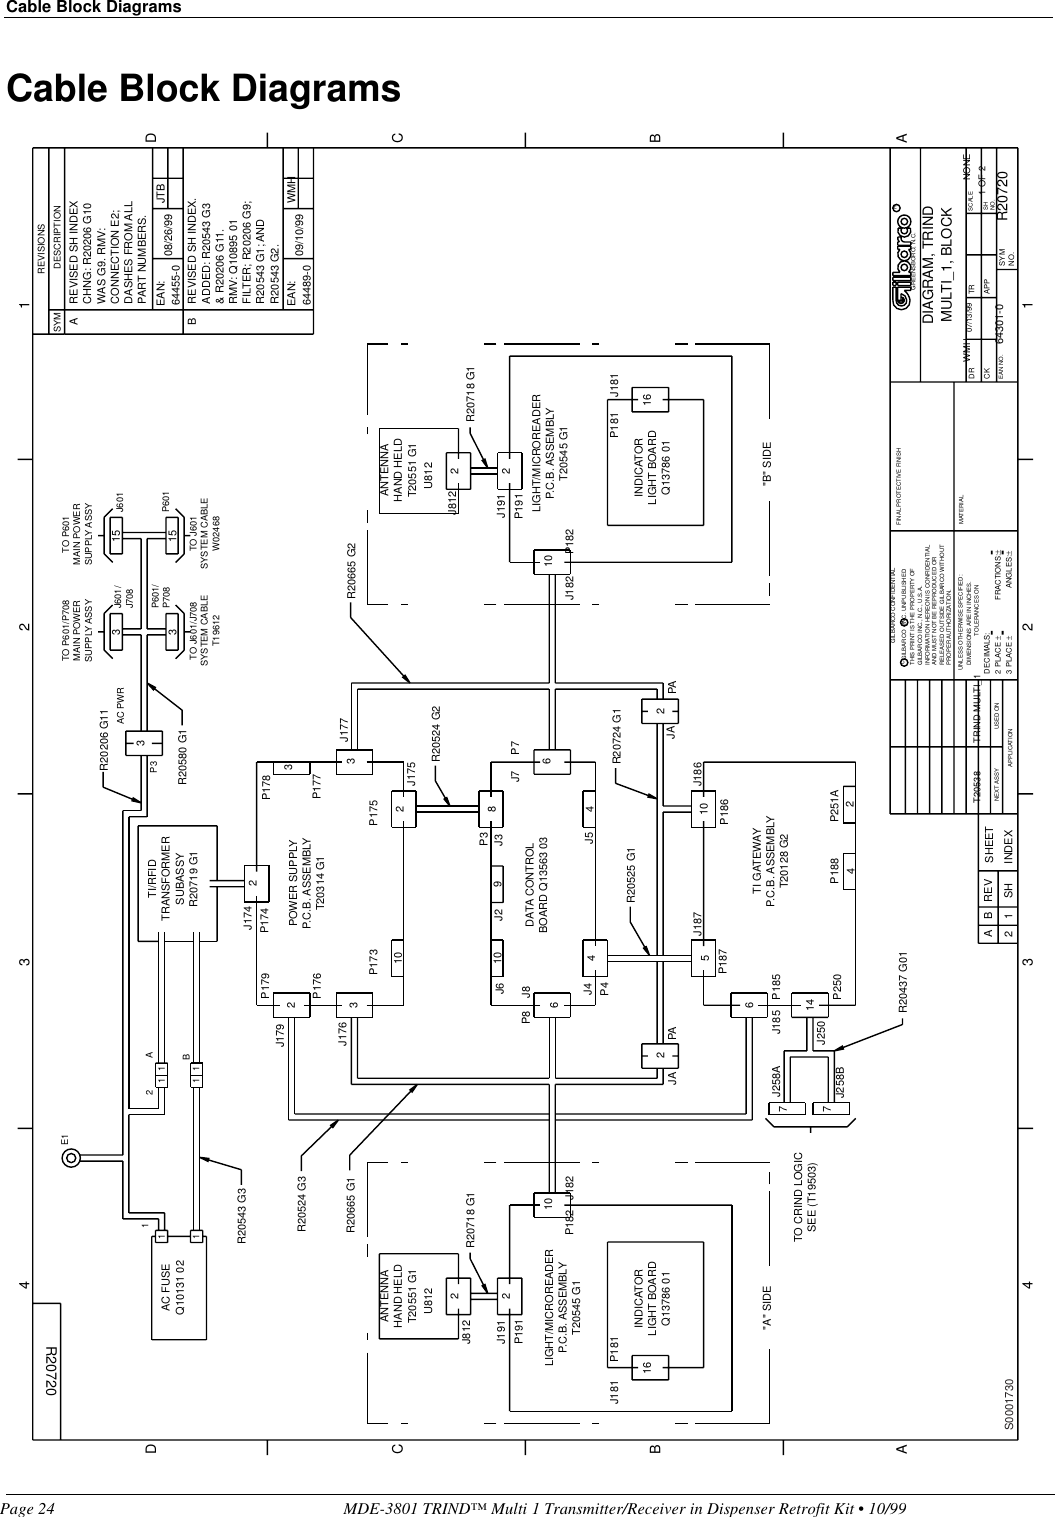 Cable Block DiagramsPage 24 MDE-3801 TRIND™ Multi 1 Transmitter/Receiver in Dispenser Retrofit Kit • 10/99Cable Block DiagramsRCRTRIND MULTI_1 WMH NONER20720R20720DIAGRAM, TRINDMULTI_1, BLOCK64301-007/13/991 OF 22J812U812J2 9P181R20718 G1INDICATORLIGHT BOARDQ13786 0116J181AJTB08/26/9964455-0EAN:REVISED SH INDEXCHNG: R20206 G10WAS G9. RMV: CONNECTION E2; DASHES FROM ALLPART NUMBERS.B REVISED SH INDEX.ADDED: R20543 G3&amp; R20206 G11. RMV: Q10895 01FILTER; R20206 G9;R20543 G1; ANDR20543 G2.WMH09/10/9964489-0EAN:111ANTENNAHAND HELDT20551 G12P191J191LIGHT/MICROREADERP.C.B. ASSEMBLYT20545 G1INDICATORLIGHT BOARDQ13786 0110J182 P18216P181 J181&quot;B&quot; SIDEP191 2J1912J812U812ANTENNAHAND HELDT20551 G1R20718 G1T205383P3R20206 G11P18845J1742P1743614P250P185P187P251AJ187J185J18210P182BA77112J258BJ258AAC PWR331515P601J601J176P176R20580 G1&quot;A&quot; SIDEJ250R20437 G01R20524 G3R20665 G1 R20665 G2TO P601/P708MAIN POWERSUPPLY ASSYTI/RFIDTRANSFORMERSUBASSYR20719 G1R20724 G1R20524 G2TI GATEWAYP.C.B. ASSEMBLYT20128 G2POWER SUPPLYP.C.B. ASSEMBLYT20314 G1LIGHT/MICROREADERP.C.B. ASSEMBLYT20545 G1J601/J708P601/P708TO J601/J708SYSTEM CABLET19612TO J601SYSTEM CABLEW02468TO P601MAIN POWERSUPPLY ASSYTO CRIND LOGICSEE (T19503)3P177J177P1752J175P17310P179J179 2P178328DATA CONTROLBOARD Q13563 03P3J3J6 10P8 J86P7J76J4P4 4J5 410P186J1862PAJA2JA PAR20525 G111AC FUSEQ10131 02R20543 G3E1SHEETINDEXREVSH 12BABACD43 21ABCD1234CK APPTRFRACTIONS:±ANGLES:±REVISIONSSYM DESCRIPTIONDR SCALESHNO.EAN NO. SYMNO.FINAL PROTECTIVE FINISHMATERIALUNLESS OTHERWISE SPECIFIED:DIMENSIONS ARE IN INCHES.TOLERANCES ONDECIMALS:2 PLACE ±3 PLACE ±NEXT ASSY USED ONAPPLICATIONGILBARCO CONFIDENTIAL  GILBARCO   INC. UNPUBLISHEDGREENSBORO, N.C.THIS PRINT IS THE PROPERTY OF GILBARCO INC., N.C., U.S.A.INFORMATION HEREON IS CONFIDENTIALAND MUST NOT BE REPRODUCED ORRELEASED OUTSIDE GILBARCO WITHOUTPROPER AUTHORIZATION.S0001730 ----